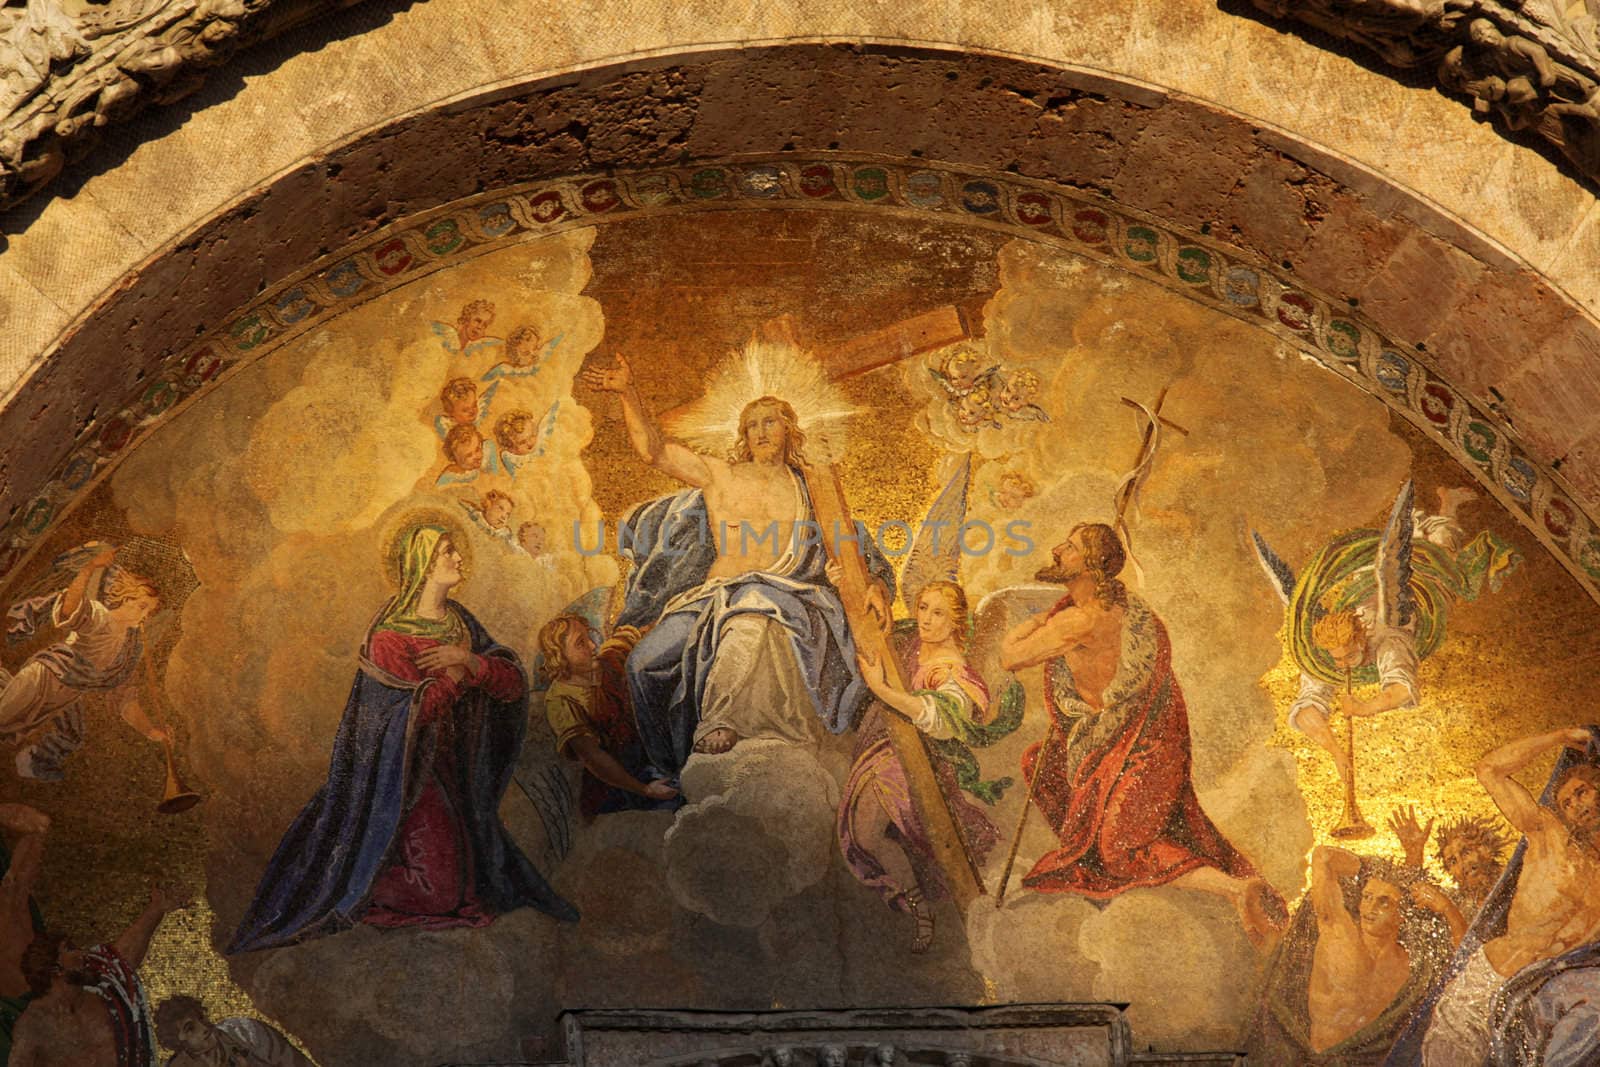 The gorgeous mosaic featuring Jesus and the cross, above the entrance to St. Mark's basilica.